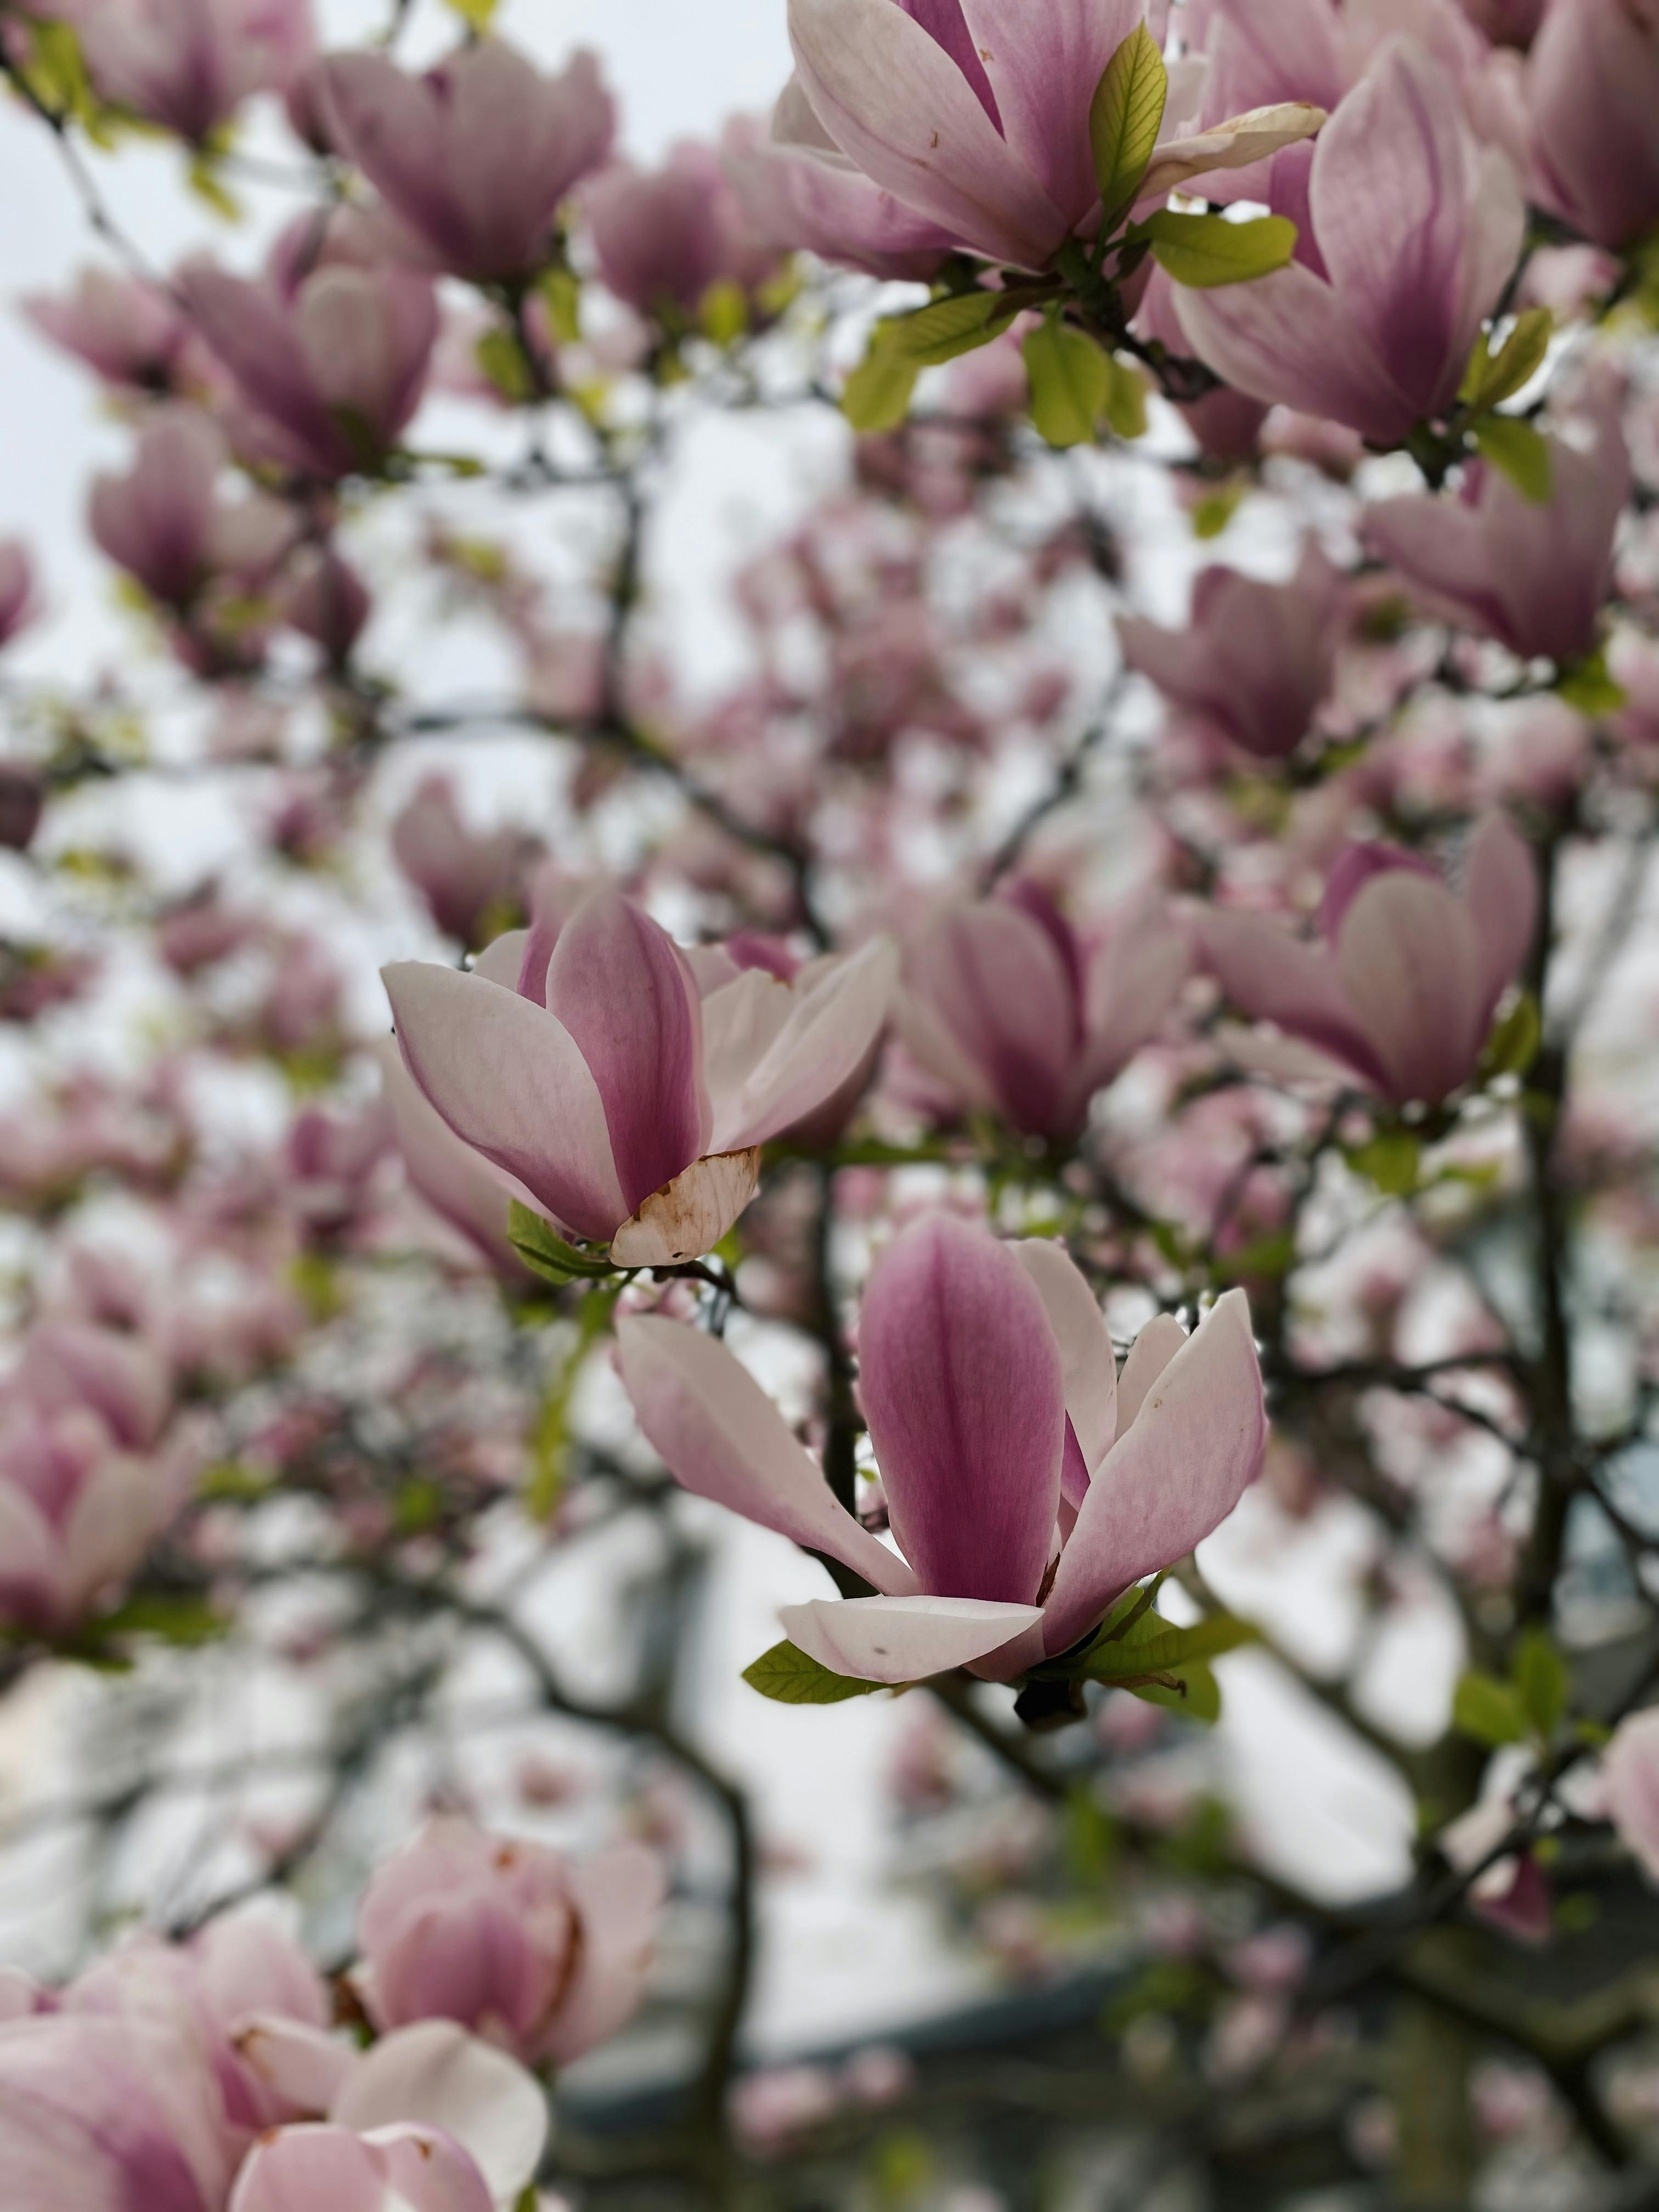 A Magnolia Flowers in Full Bloom · Free Stock Photo